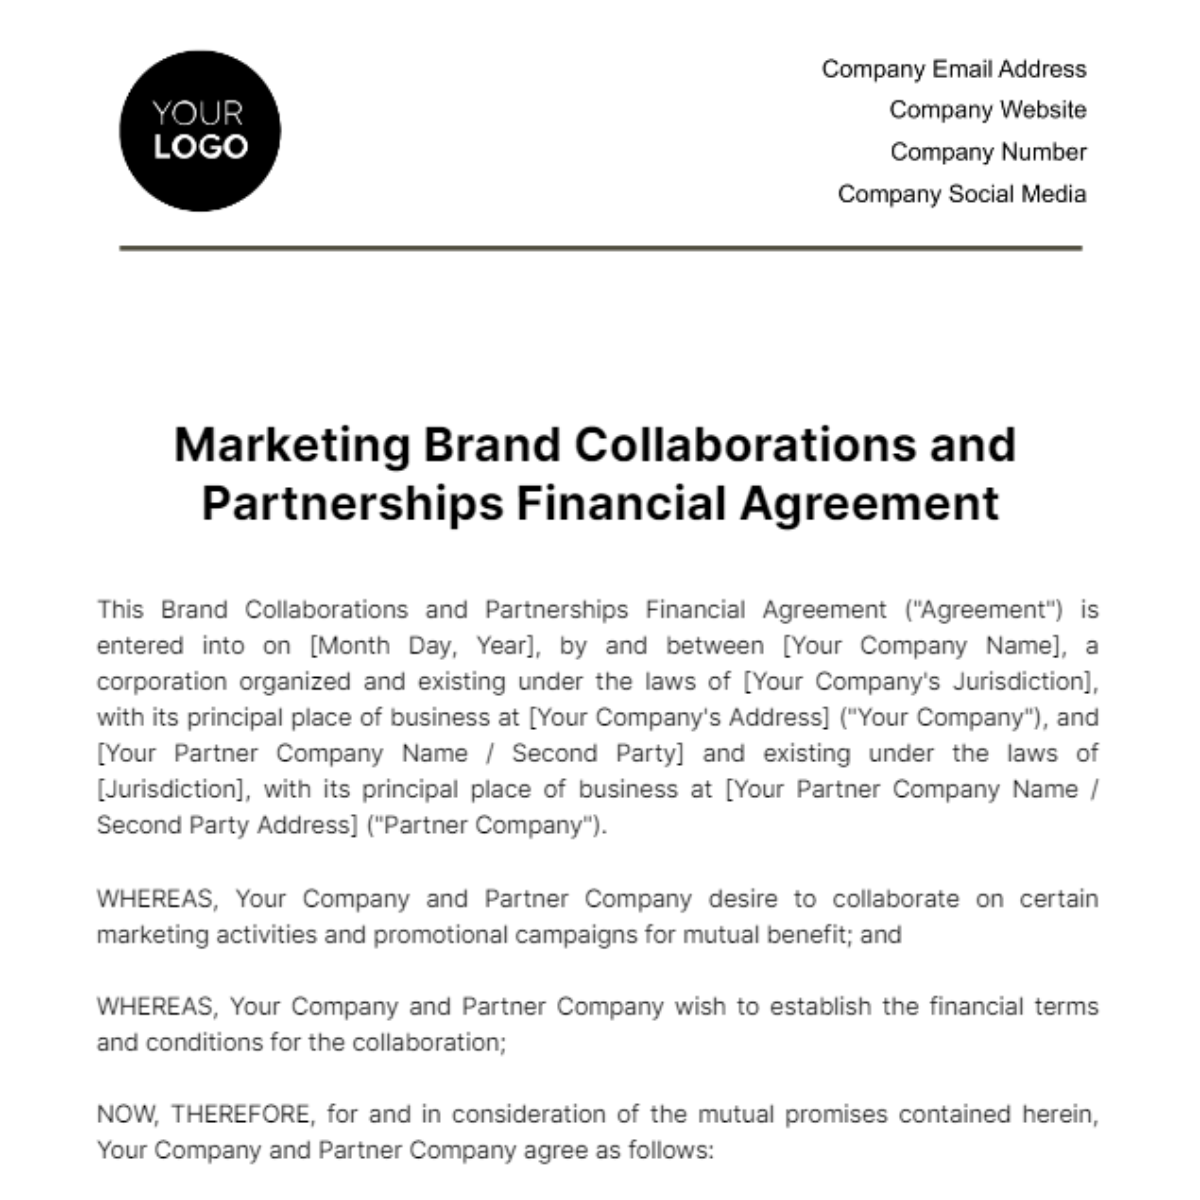 Free Marketing Brand Collaborations and Partnerships Financial Agreement Template